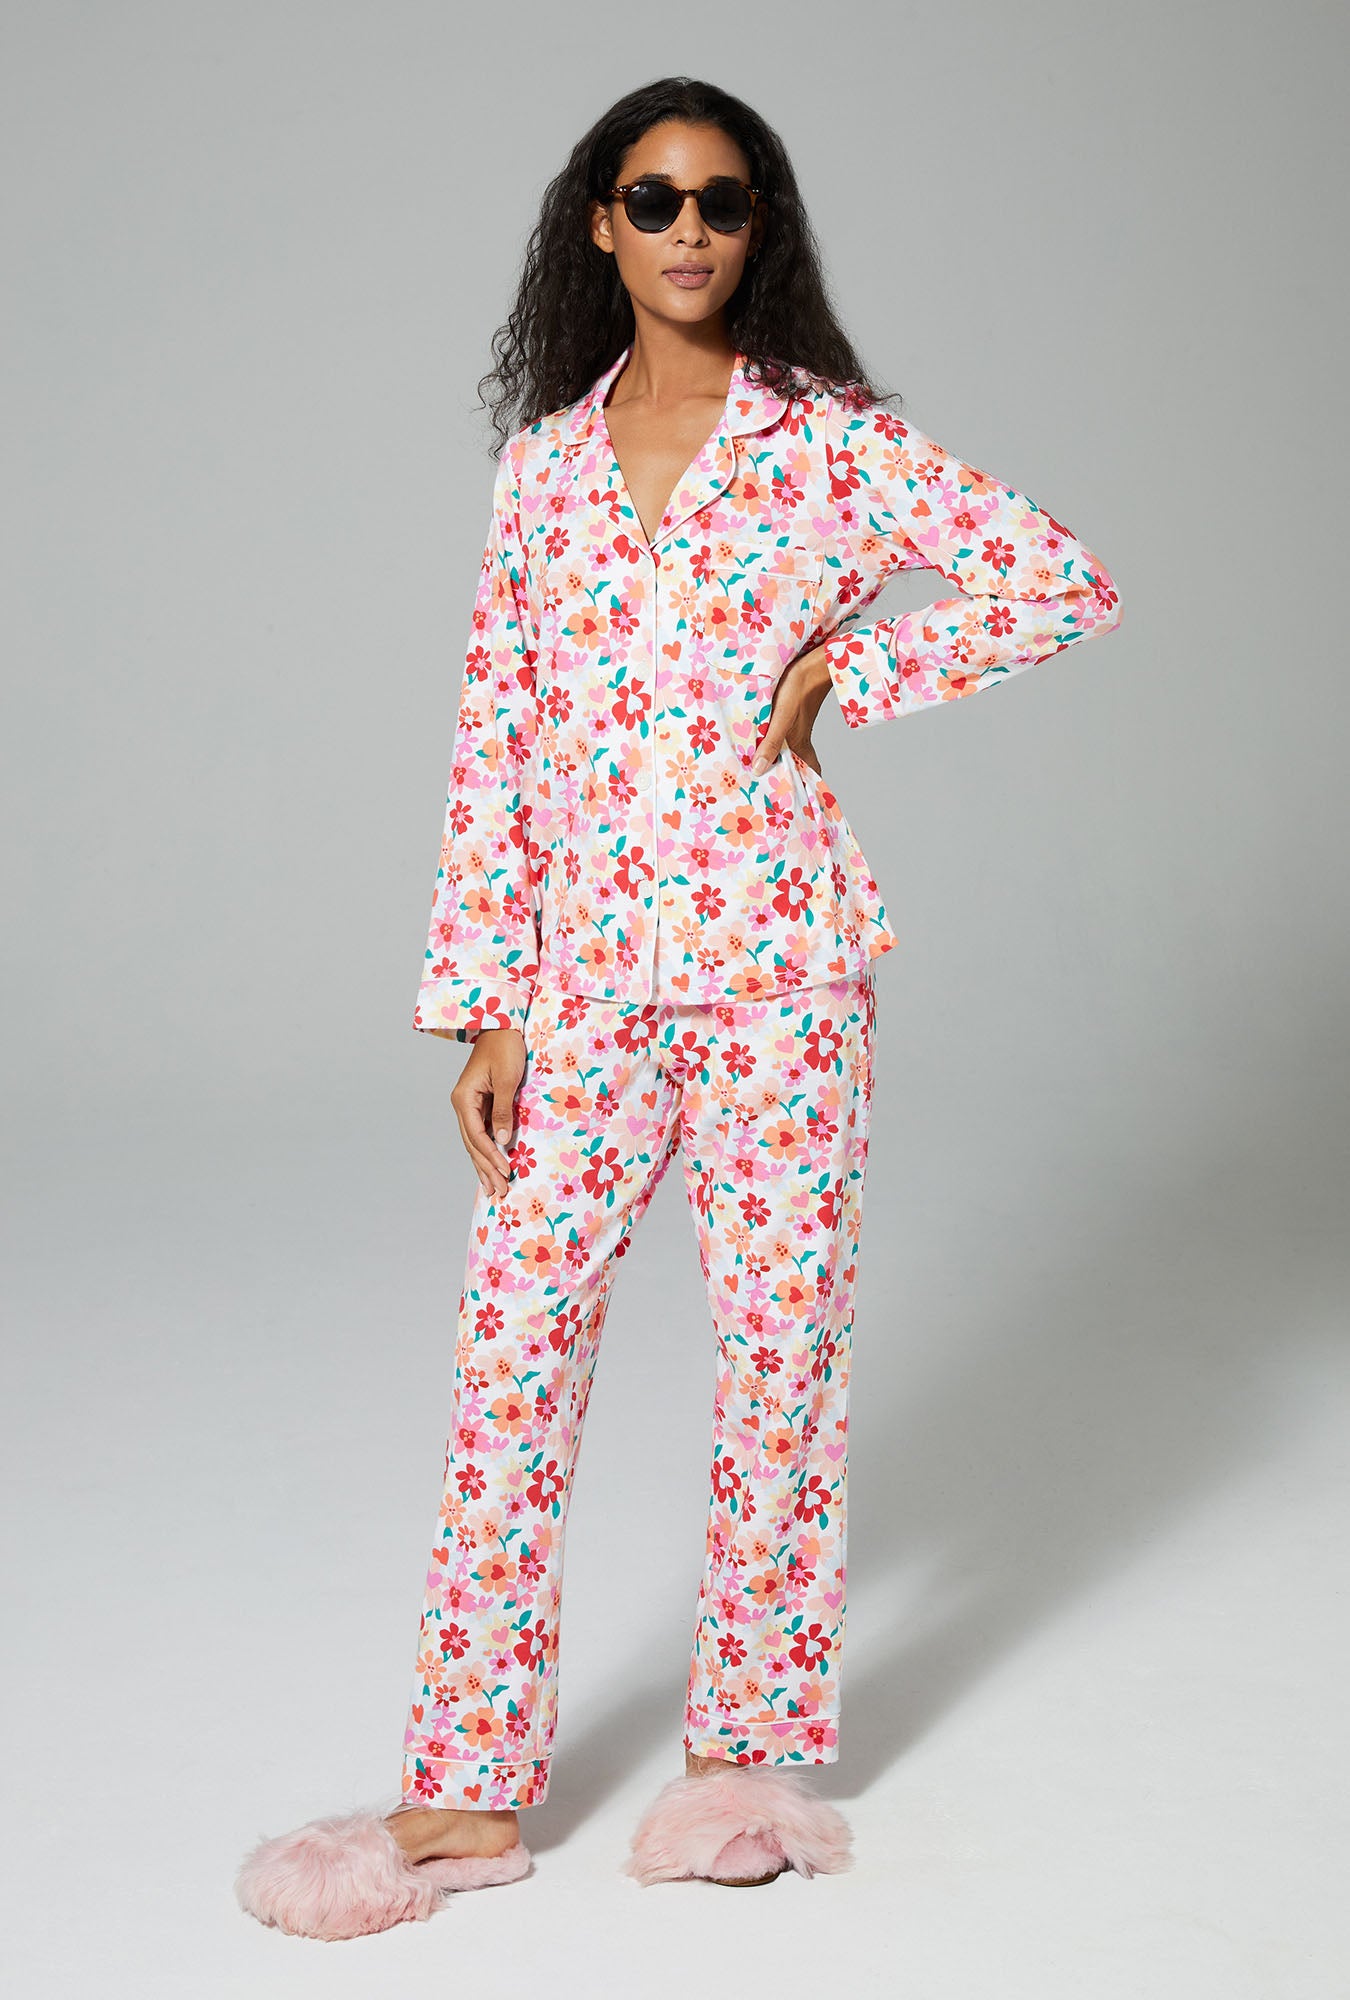 A lady wearing white long sleeve classic stretch jersey pj set with hearts and flowers print